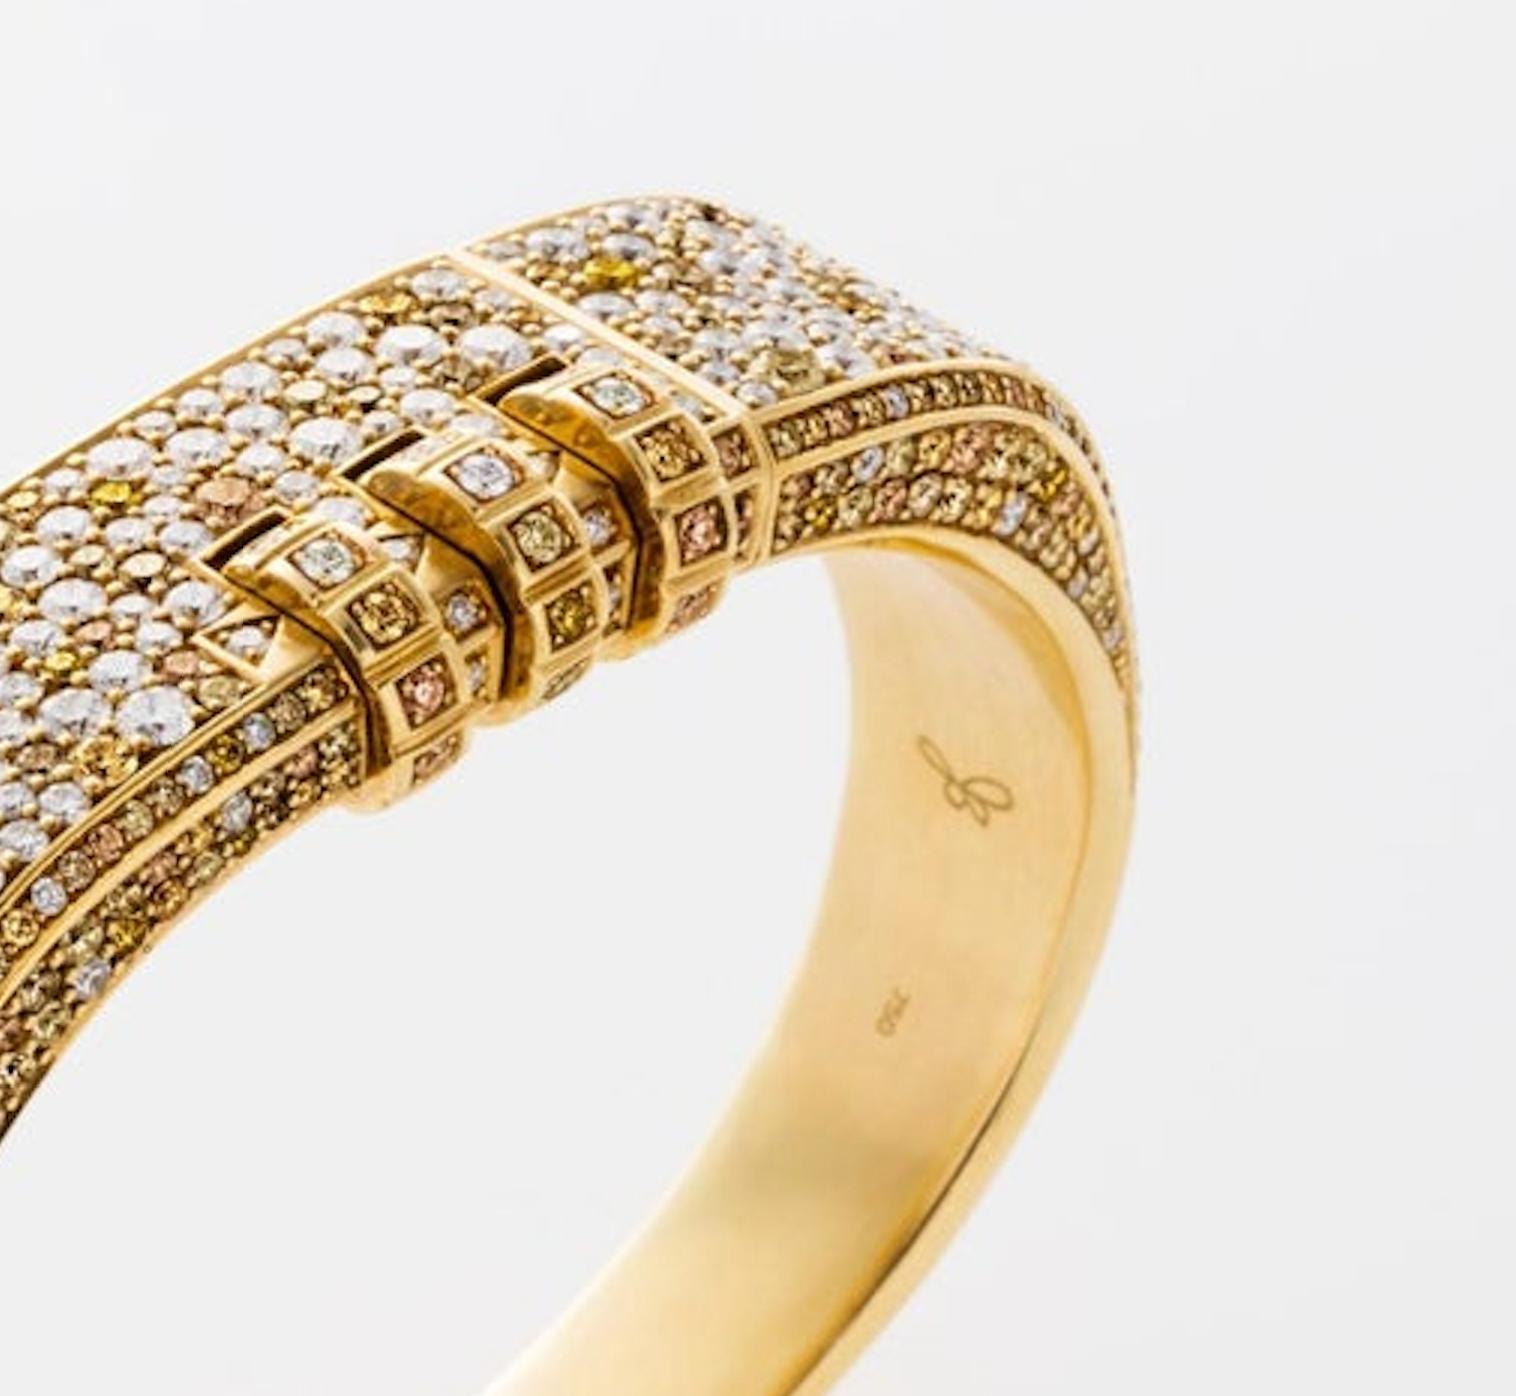 This Made to Order 18 Karat Pave Code Bracelet features a thick solid 18k yellow gold band with your choice of pave precious stones, and a customizable code that opens and locks the bracelet onto the wearer's wrist. 
Lock Combination can be